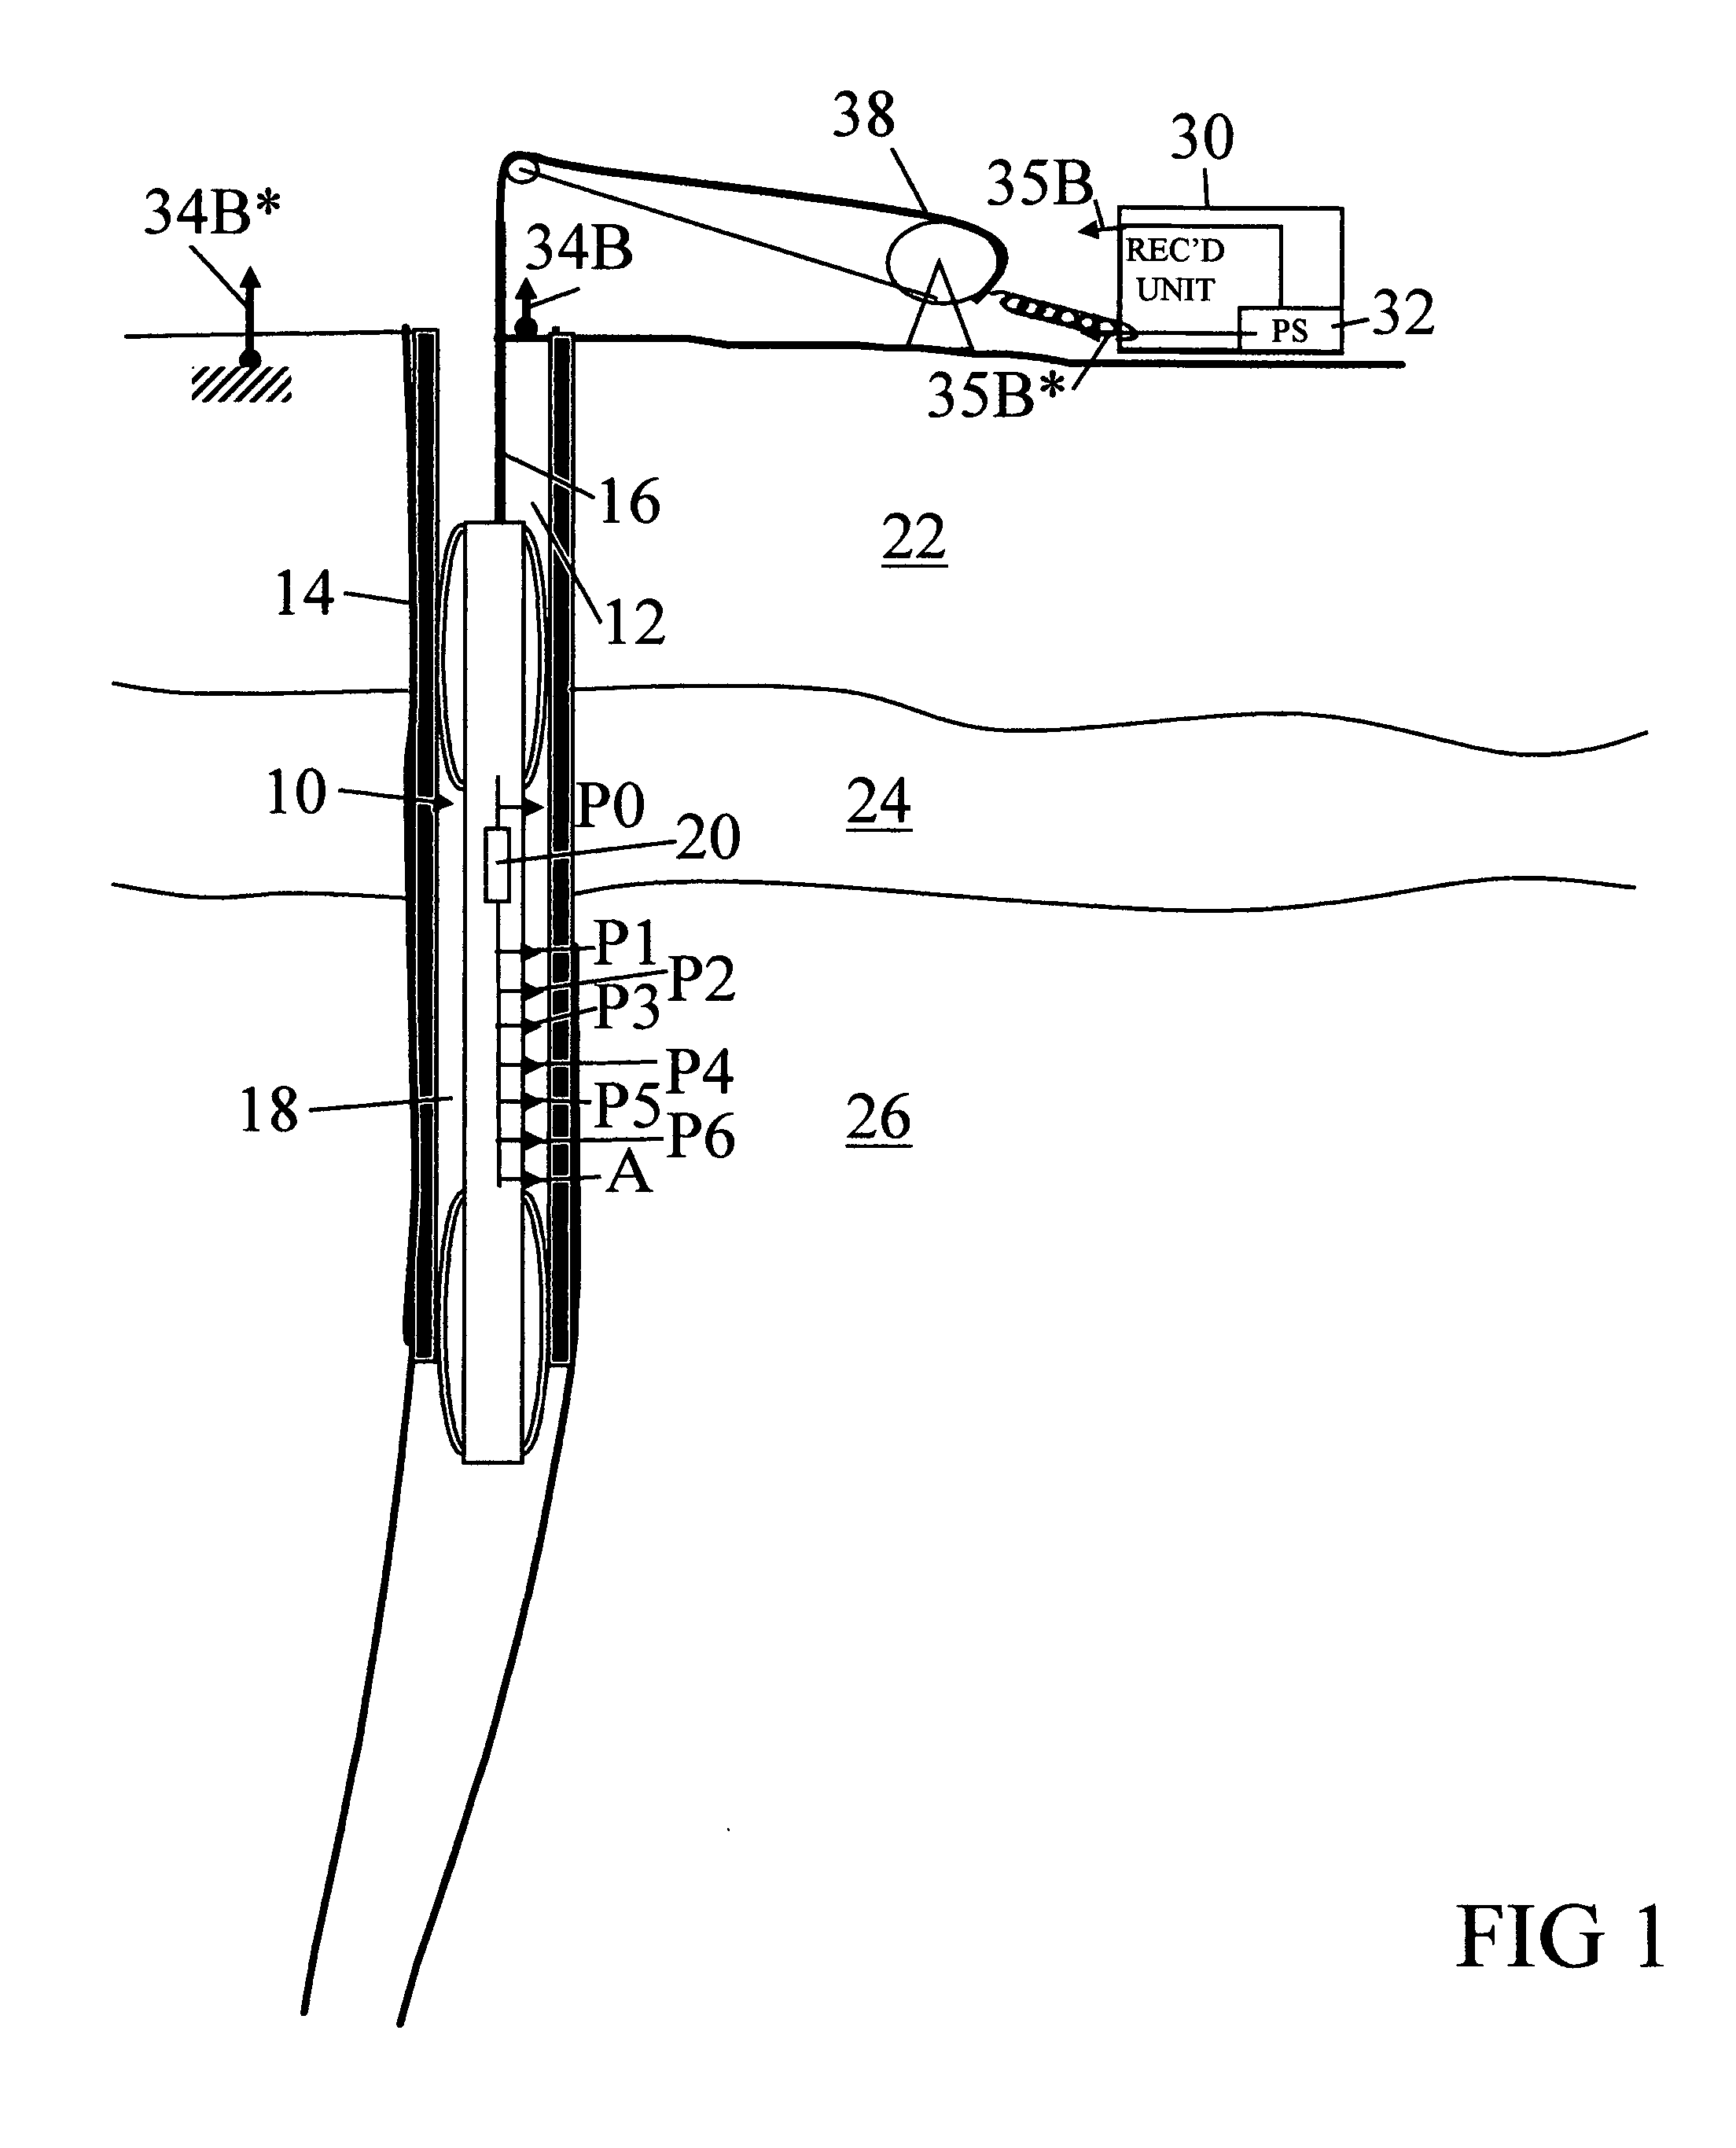 Method and apparatus for measuring formation conductivities from within cased wellbores by combined measurement of casing current leakage and electromagnetic response